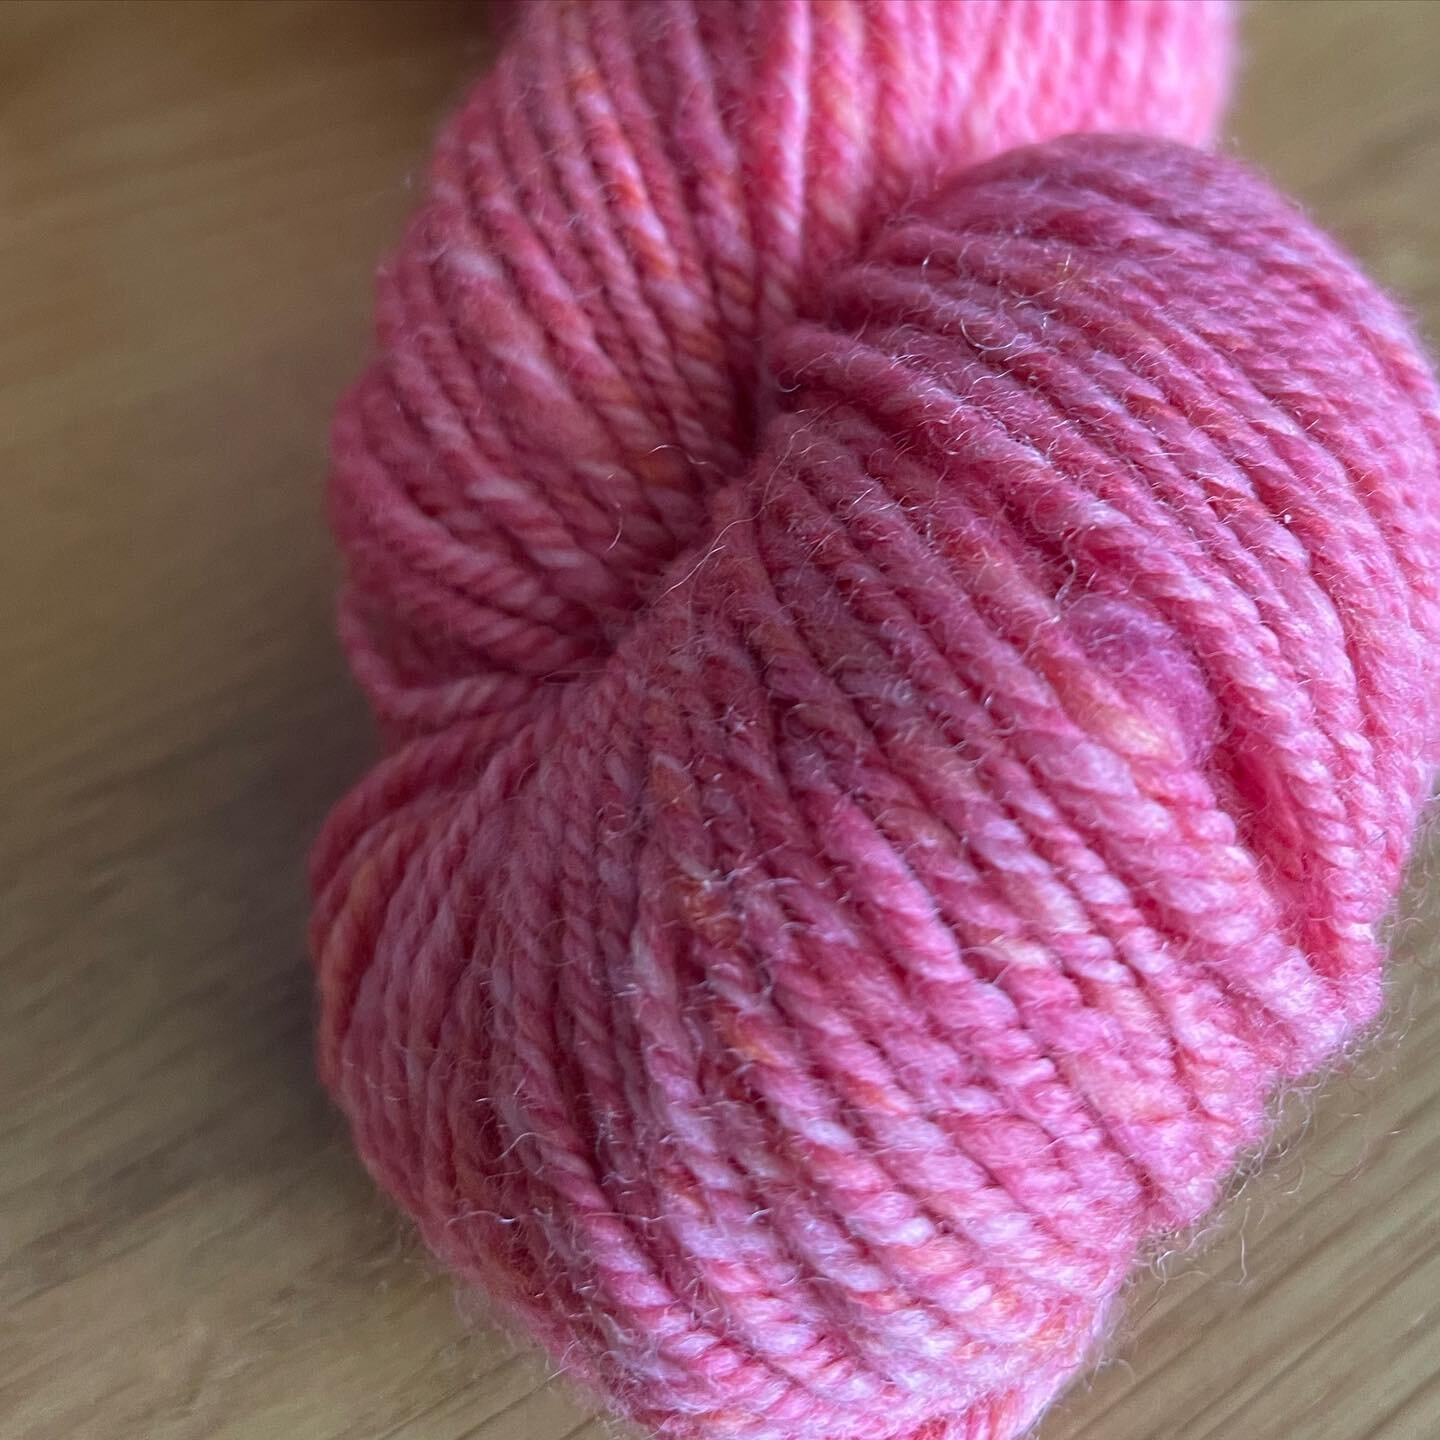 In the mood to knit some hearts. This yarn is perfect!  Hand spun and hand dyed by me, this is my signature &lsquo;Coral-Rose&rsquo; colourway. So pretty. 🥰❤️💕💖🥰 

#handspinning #handspun #handspunyarn #spinstagram #knitstagram #spinningfiber #sp